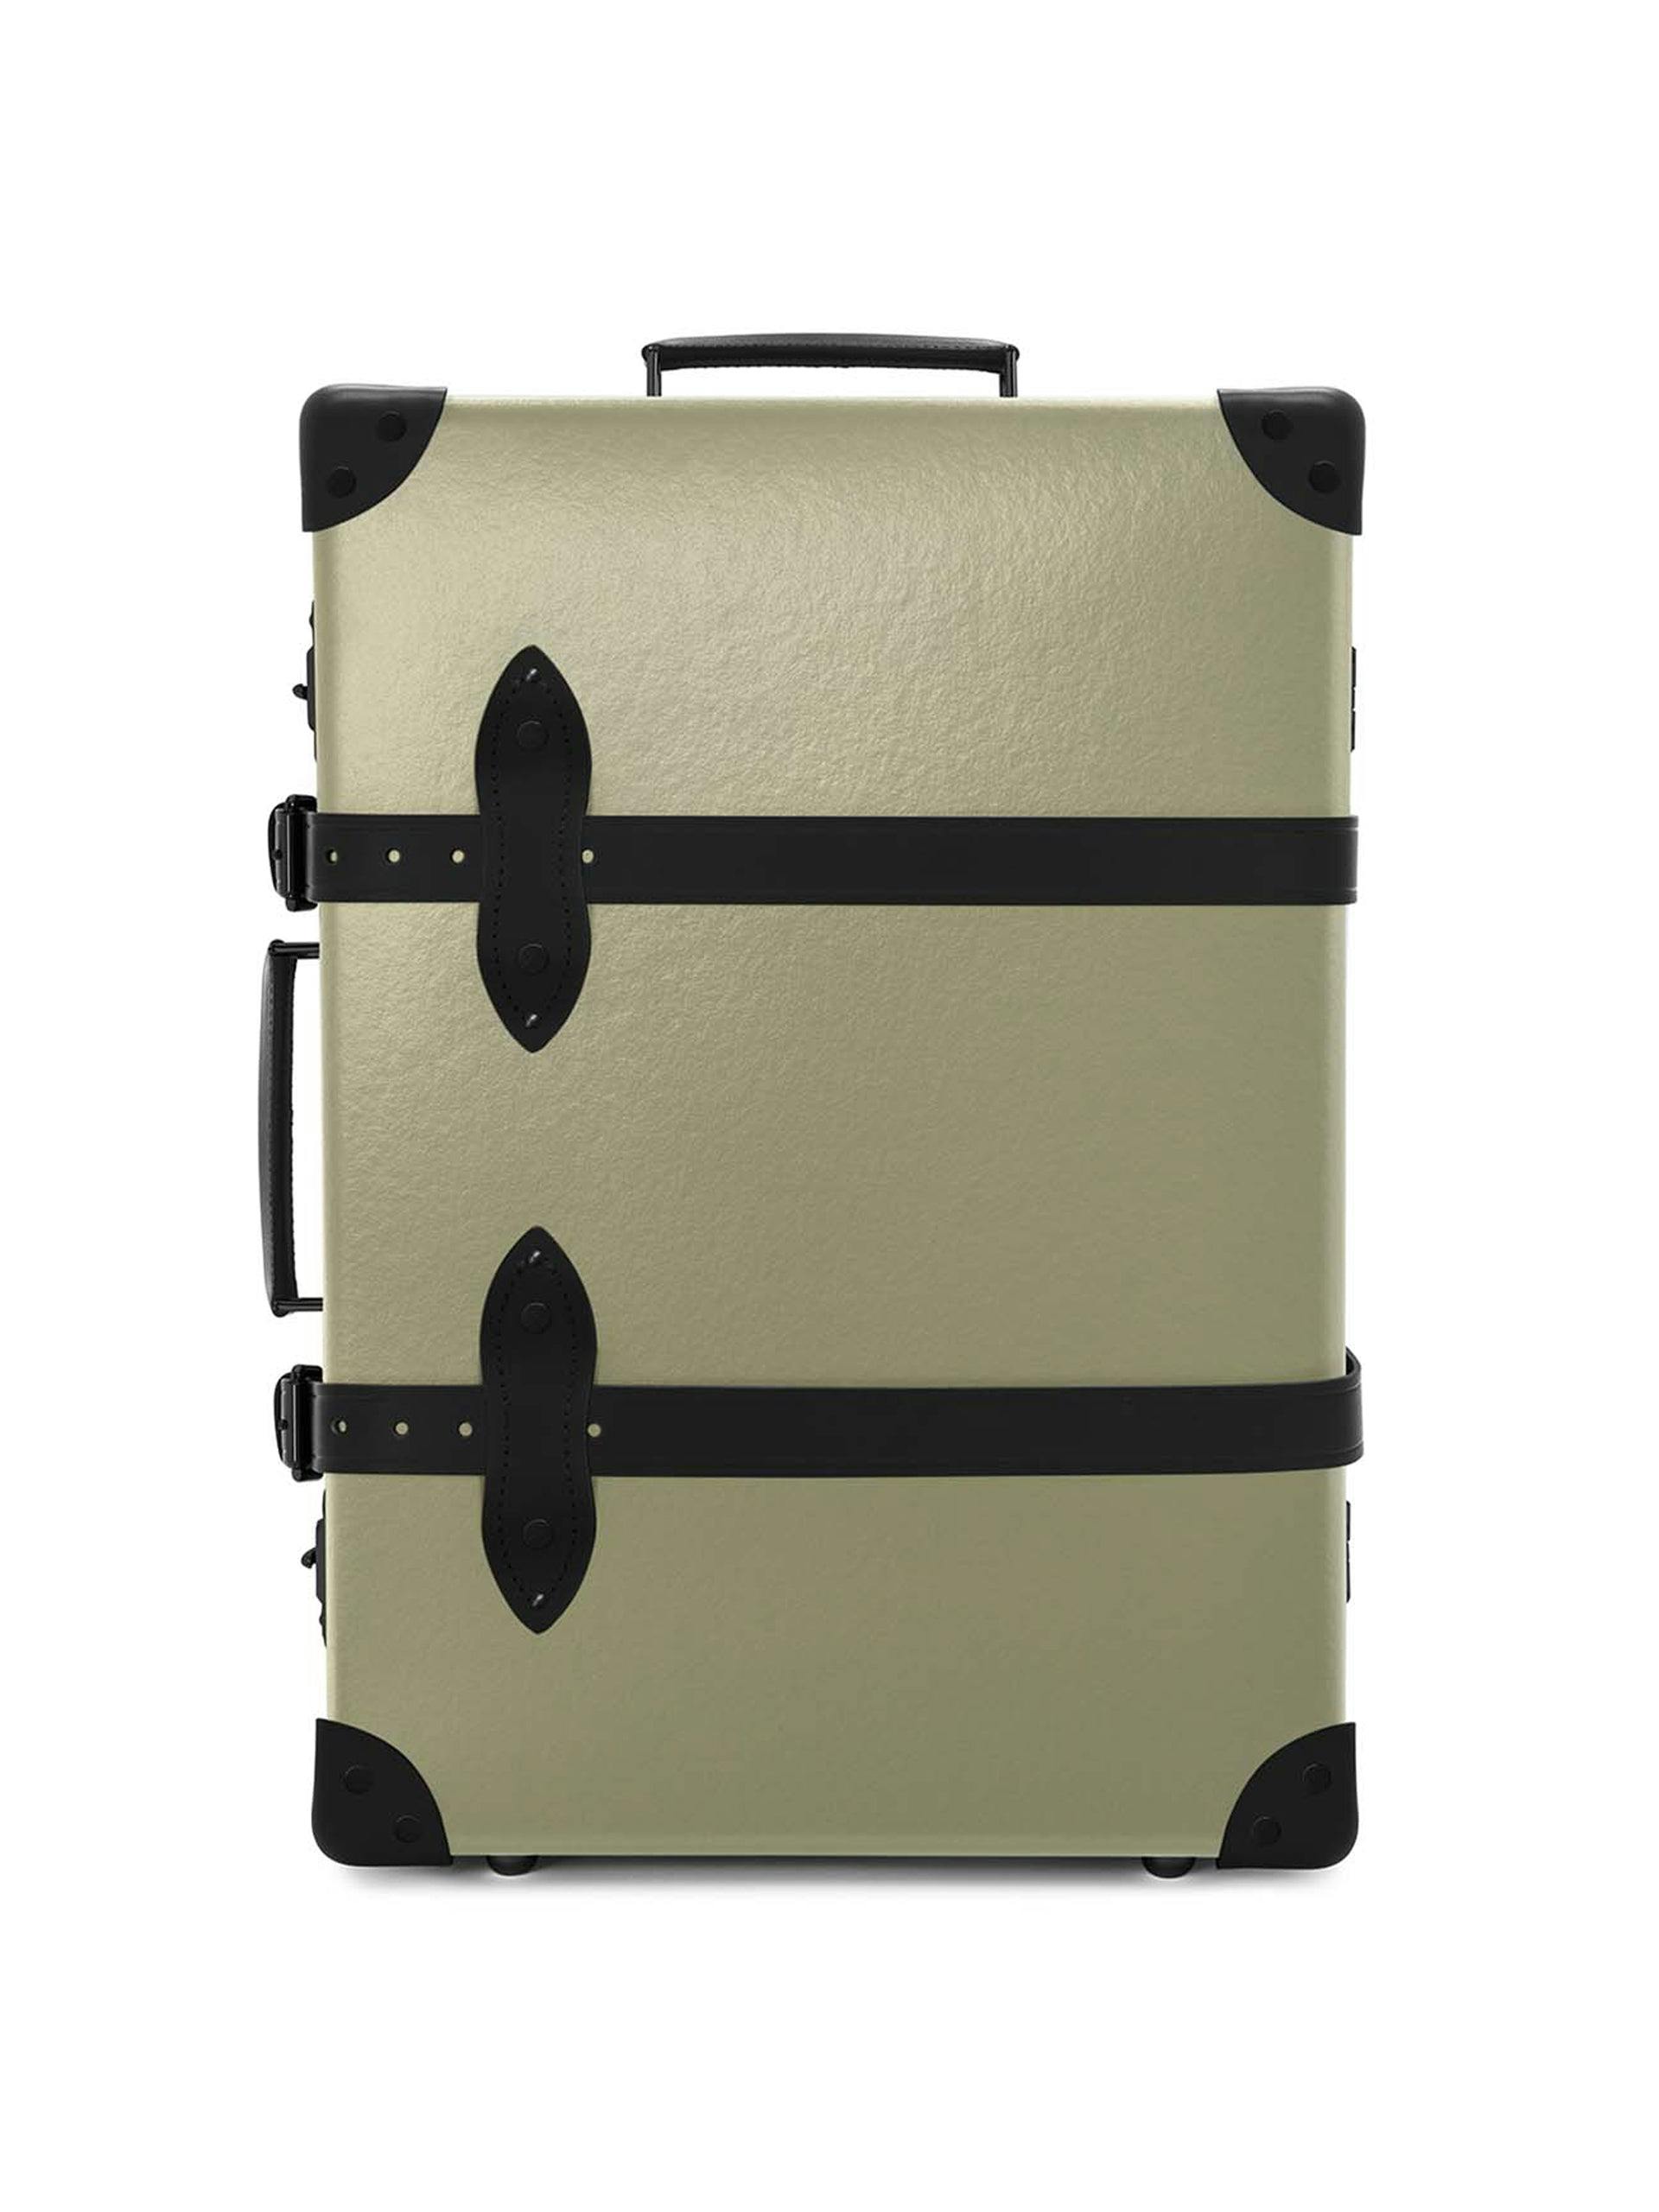 2-Wheel carry-on suitcase in Olive/Black